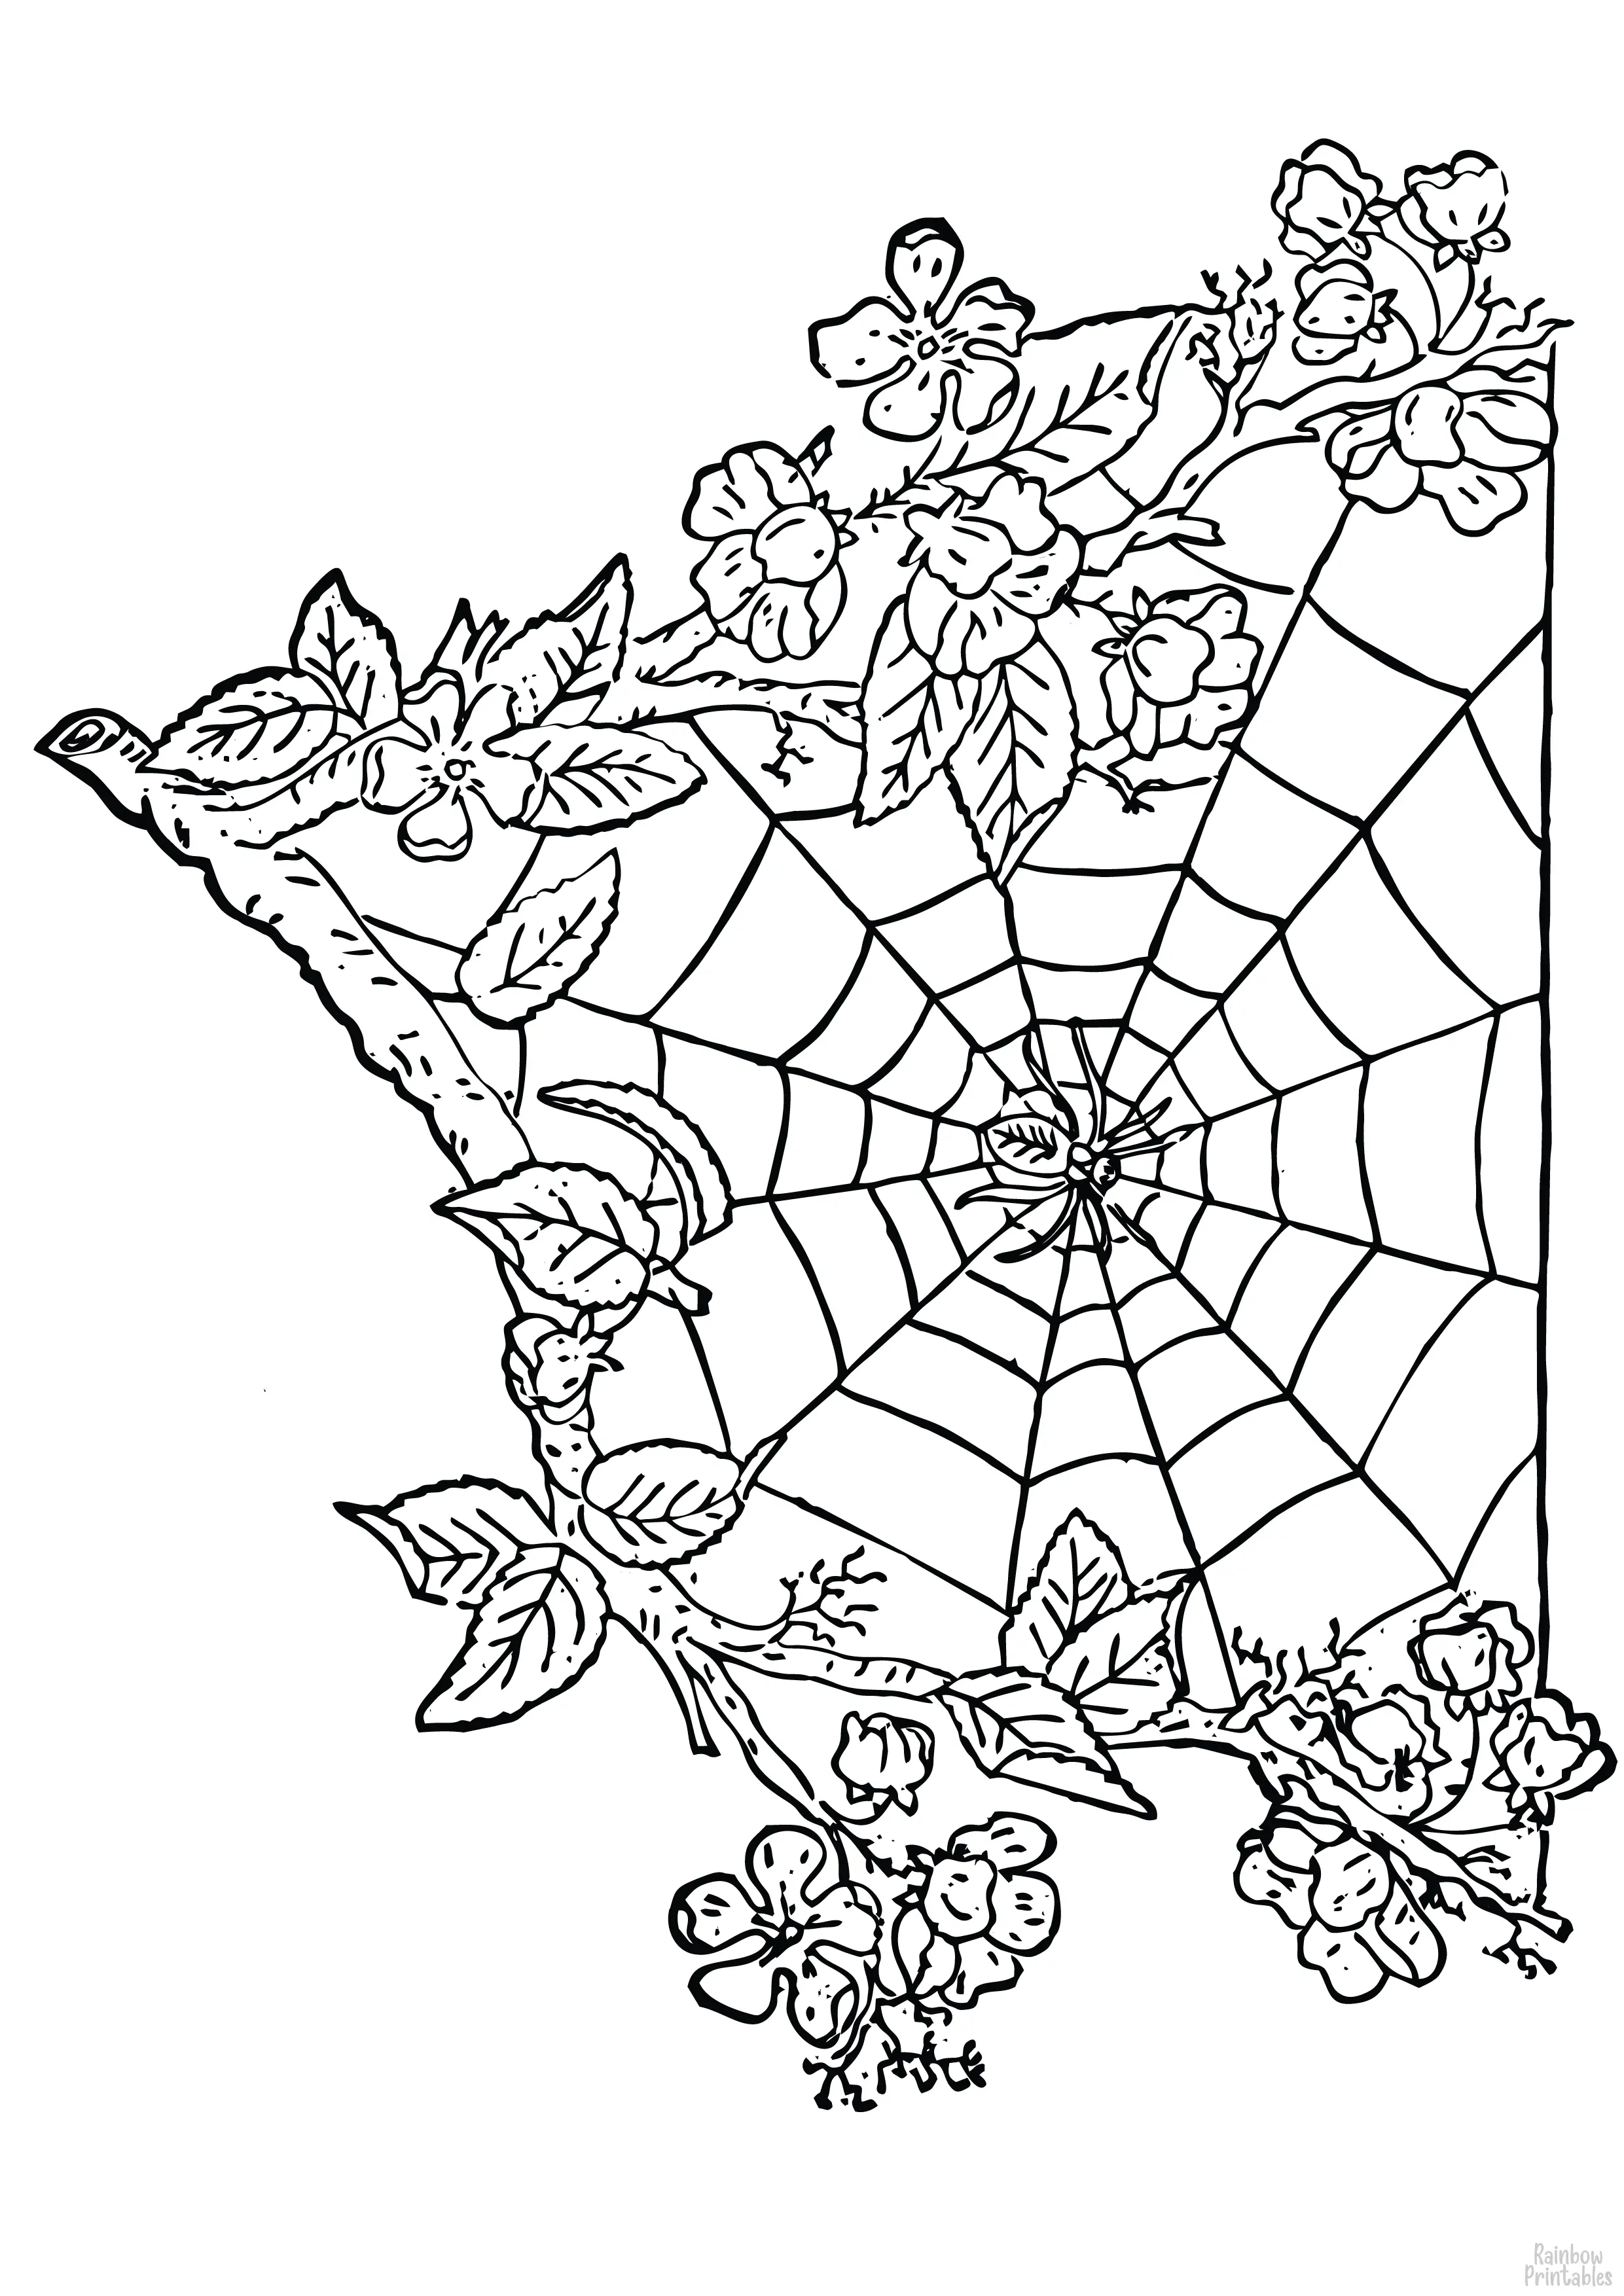 WEB FLOWERS TREES SPIDER Line Art Drawing Set Free Activity Coloring Pages for Kids